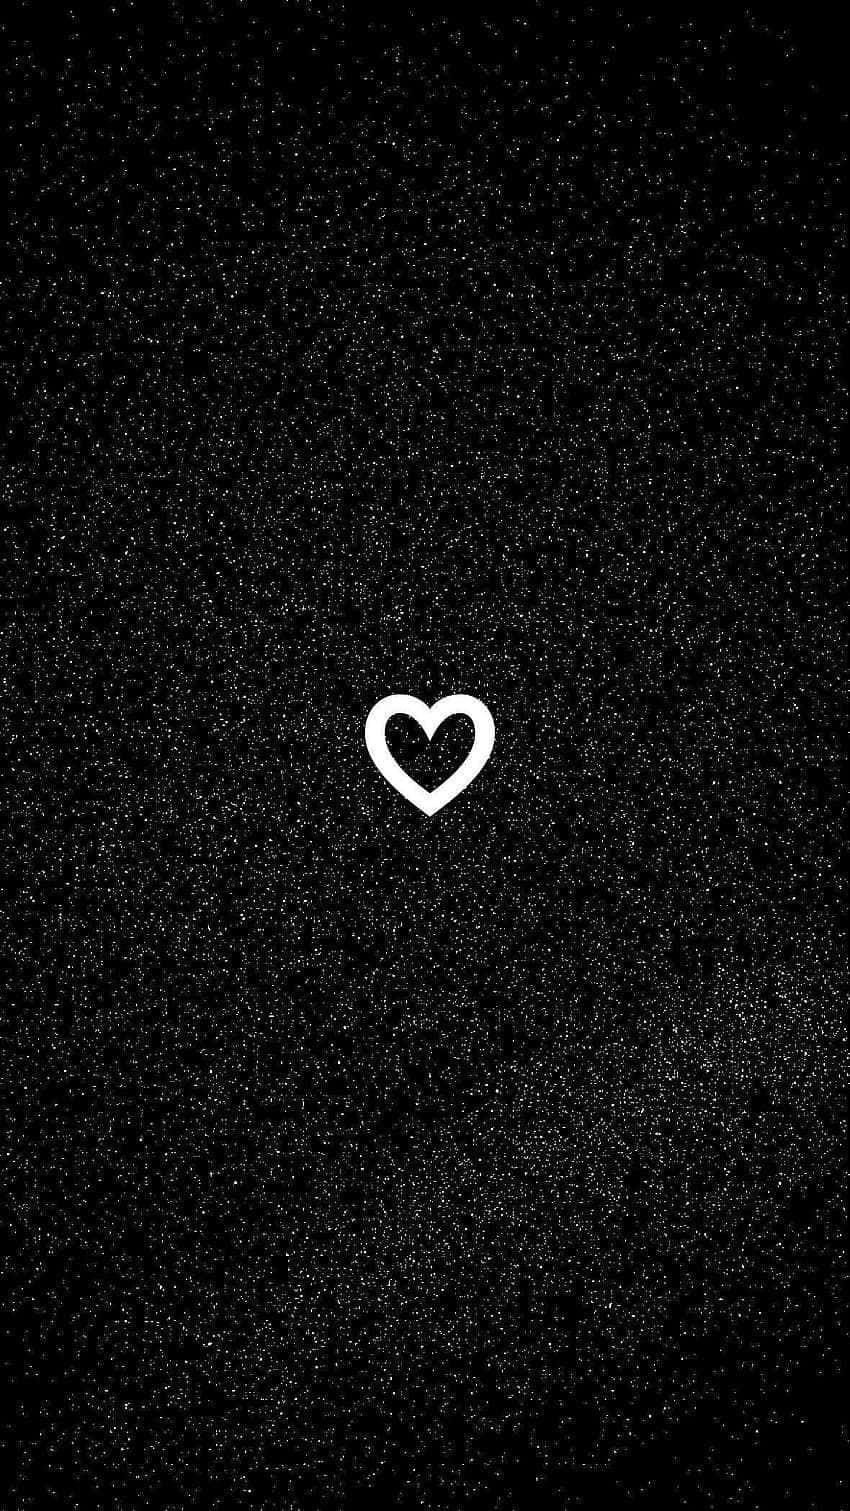 Solitary_ Heart_ Amidst_ Darkness Wallpaper